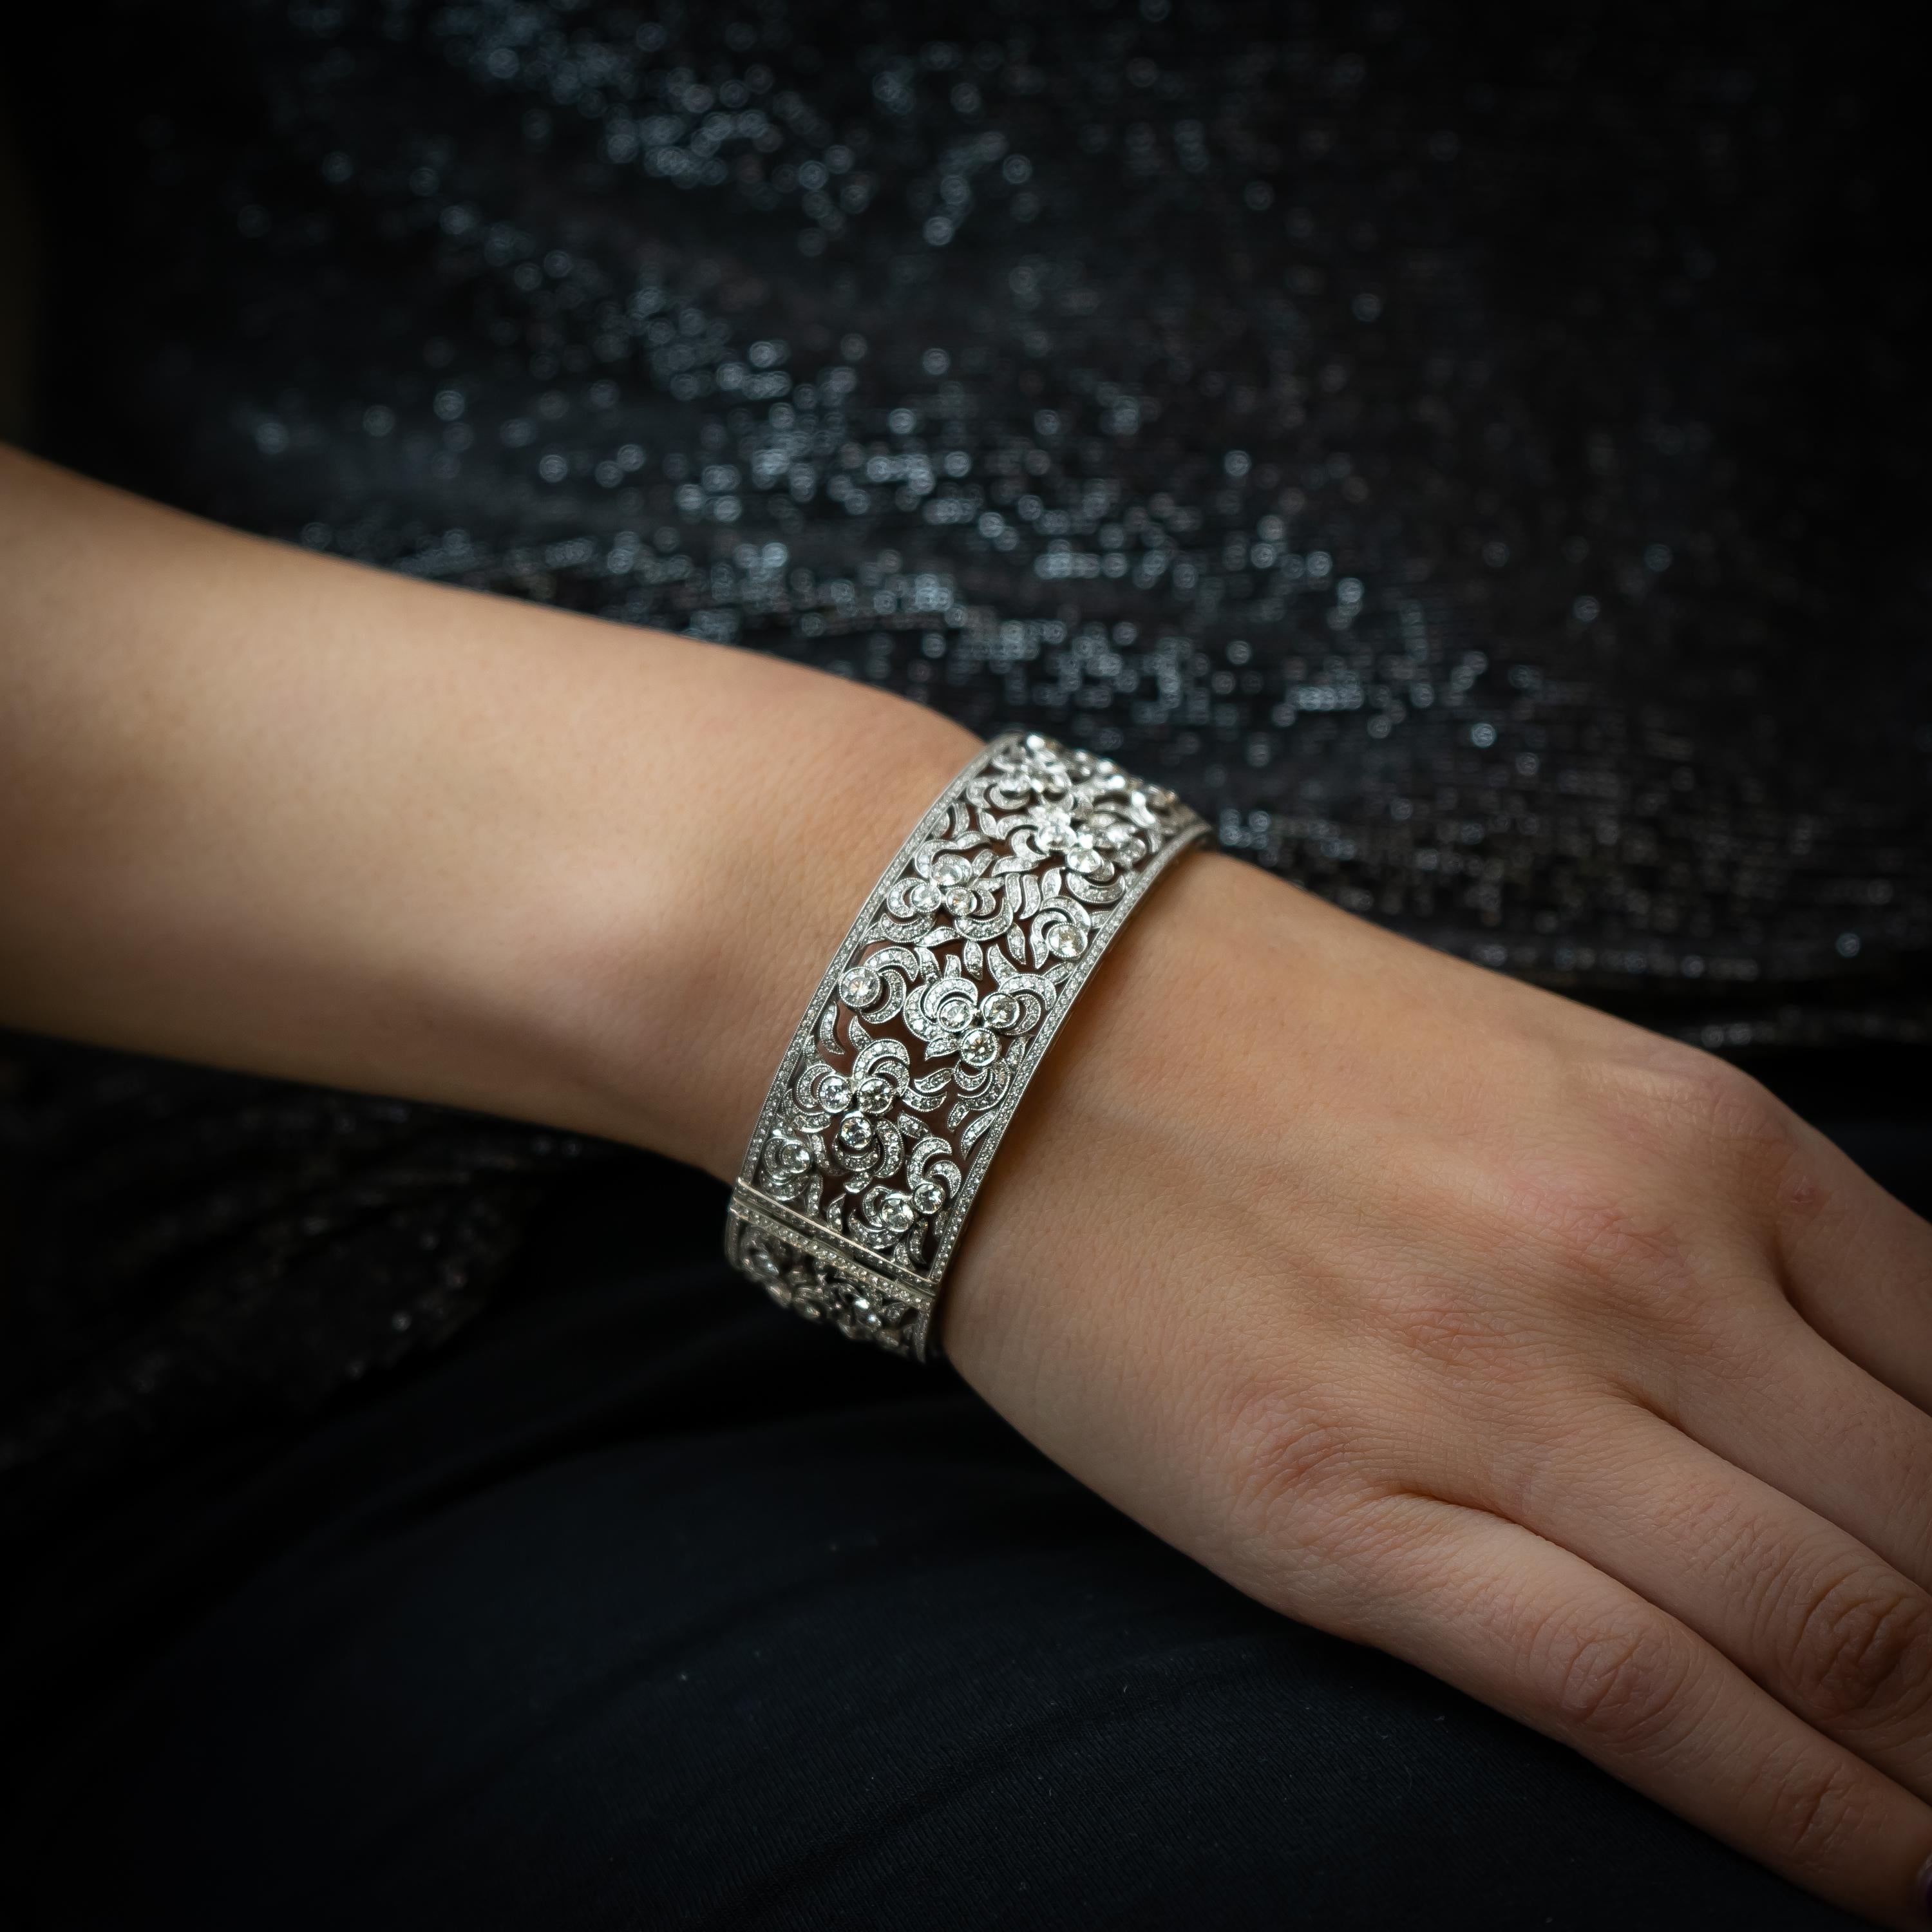 A modern diamond clasp bangle, set with 11.23ct of round brilliant-cut diamonds, in rub over and pavé settings, with millegrain edges, with an openwork swirl design, mounted in platinum. 